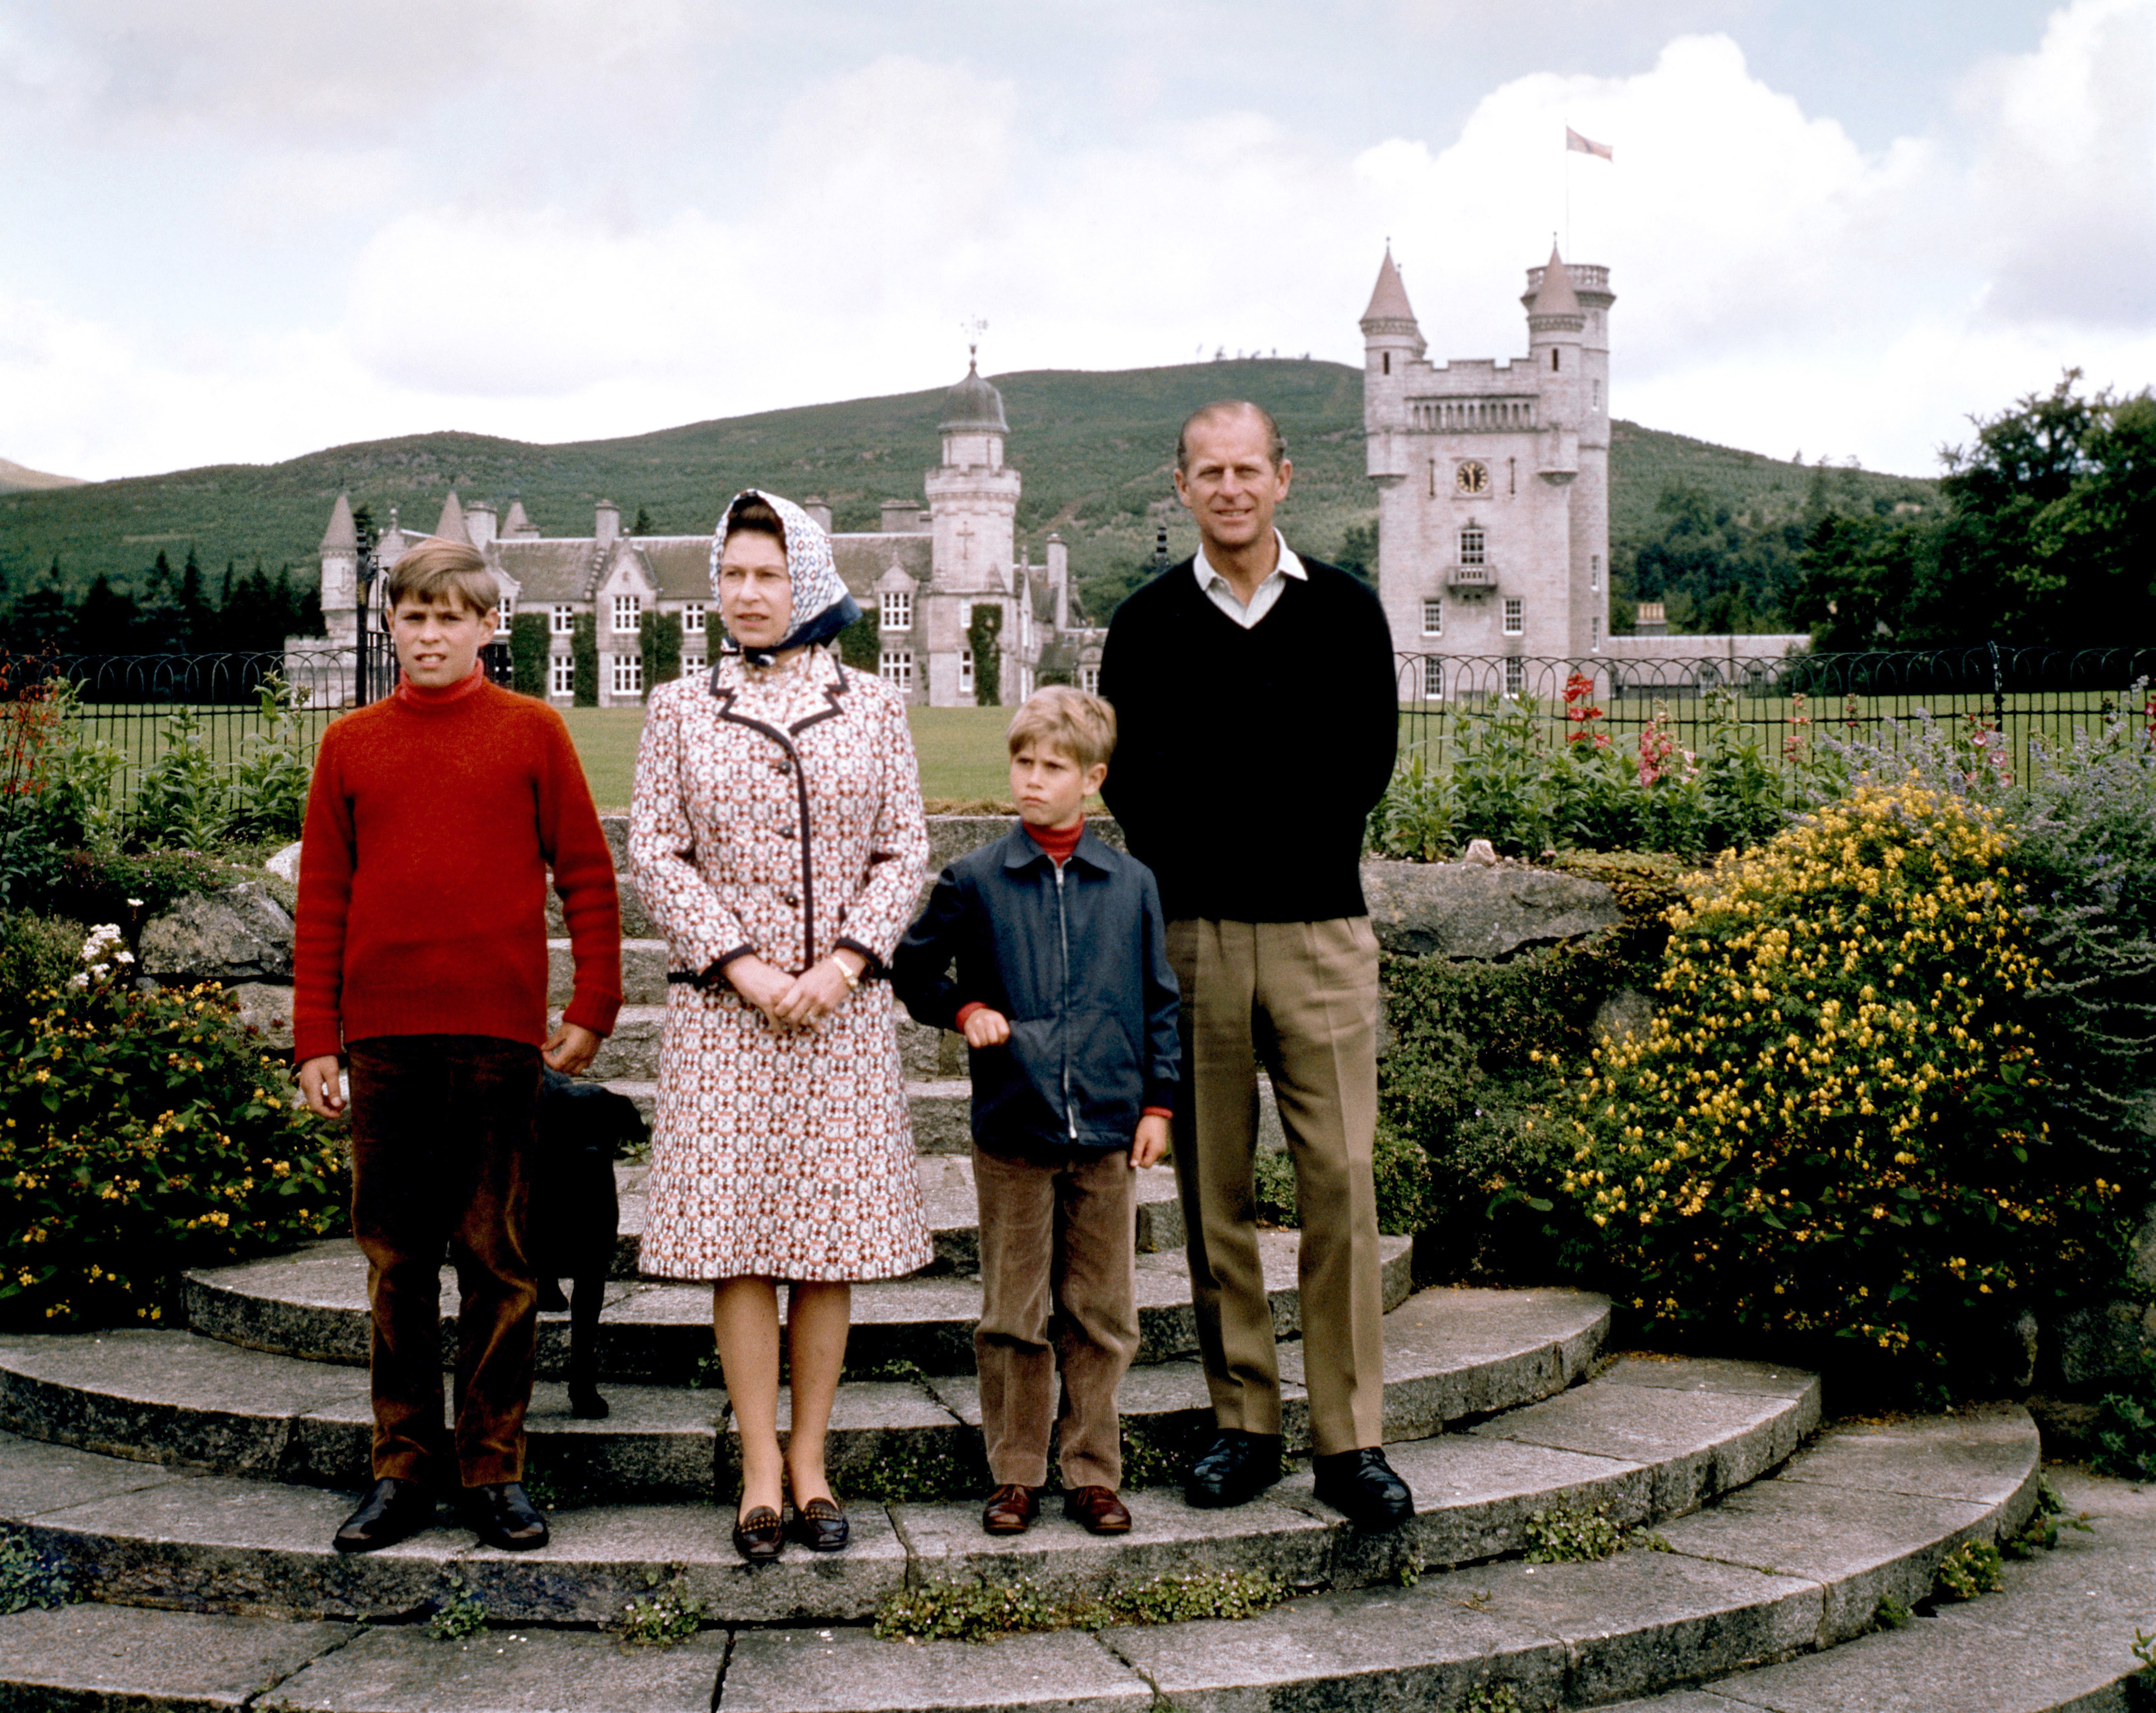 The Queen is said to never be happier than when she is staying at Balmoral estate (PA)